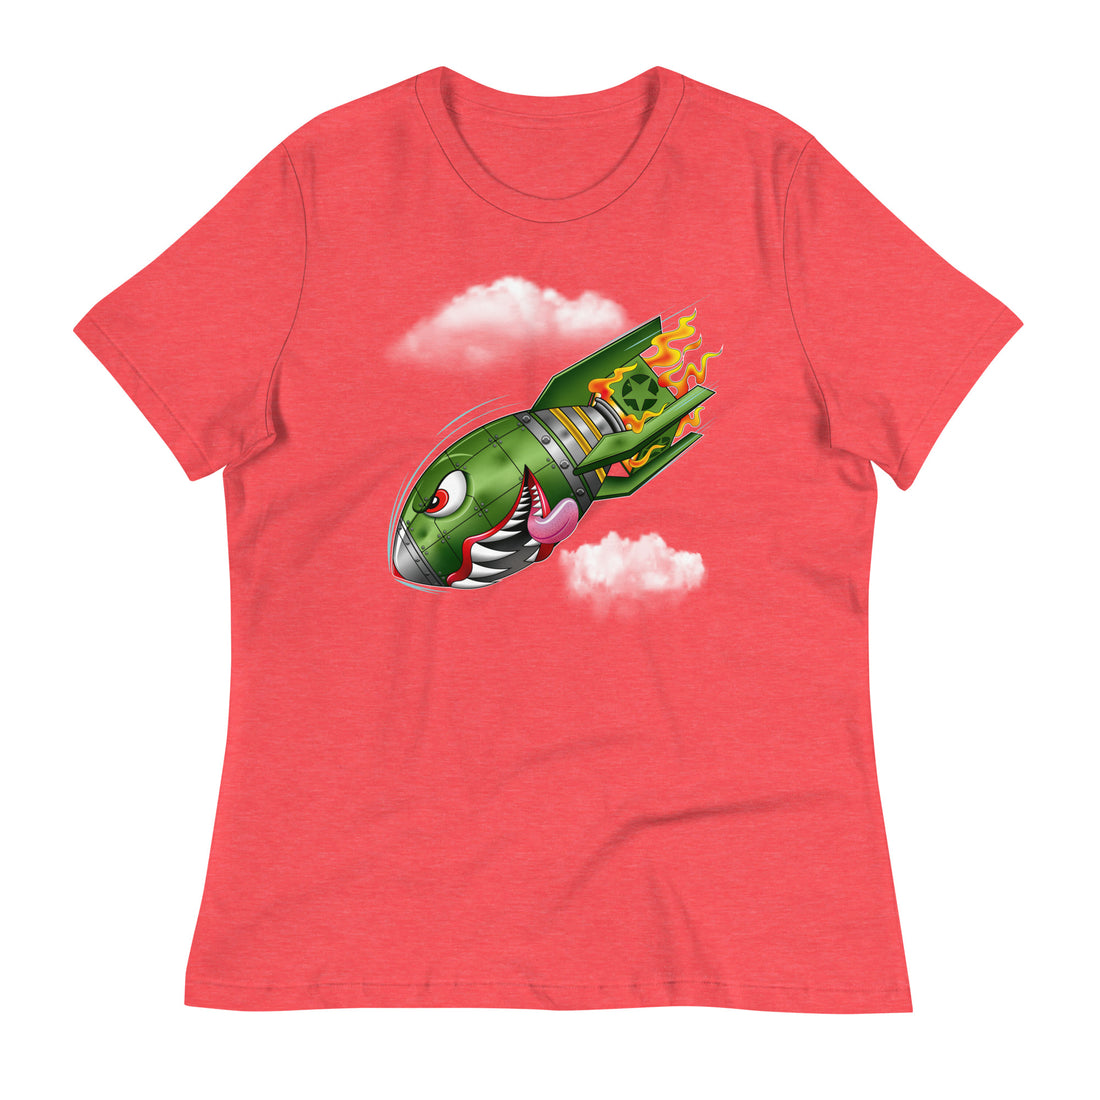 An heather red t-shirt with a military green neo-traditional bomb tattoo design. The bomb is falling with a look of determination in its eyes, an evil toothy grin, and its tongue hanging out of its mouth. Flames are coming from the back of the bomb, and some clouds are in the background.